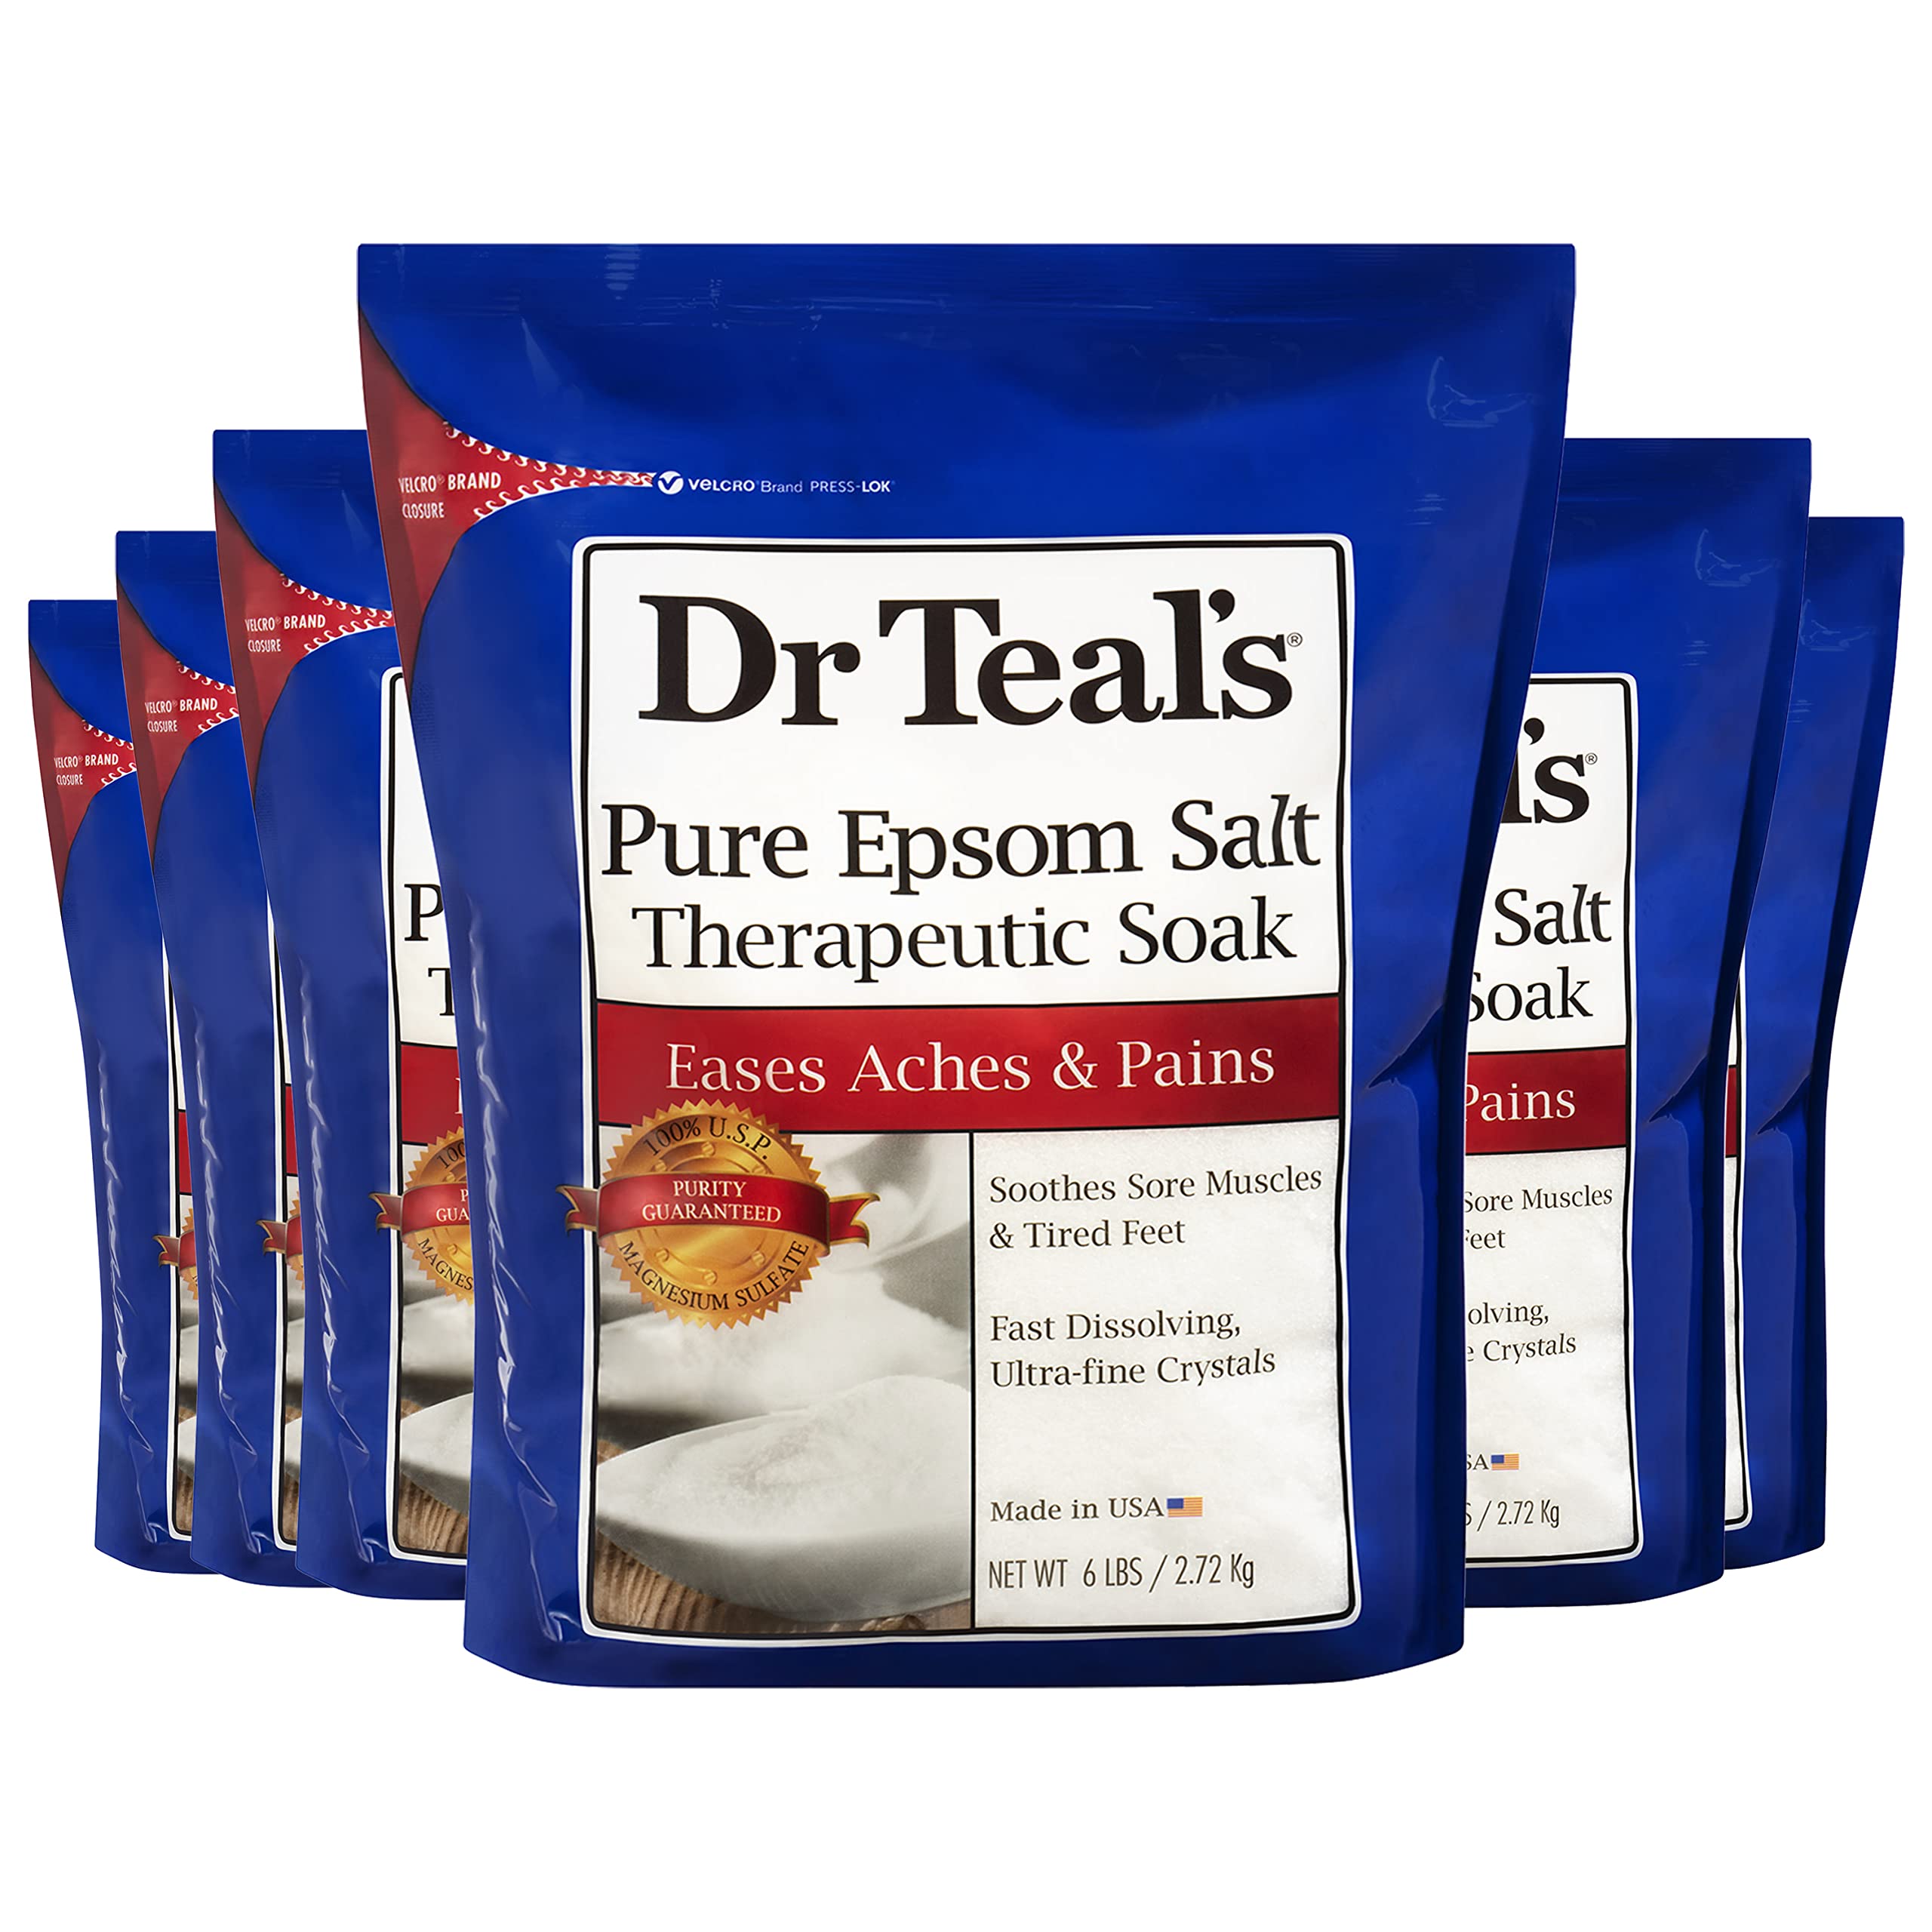 Dr Teal's Unscented Epsom Salt Bulk Magnesium Sulfate USP, 6 lbs (Pack of 6) 36 lbs Total (Packaging May Vary)